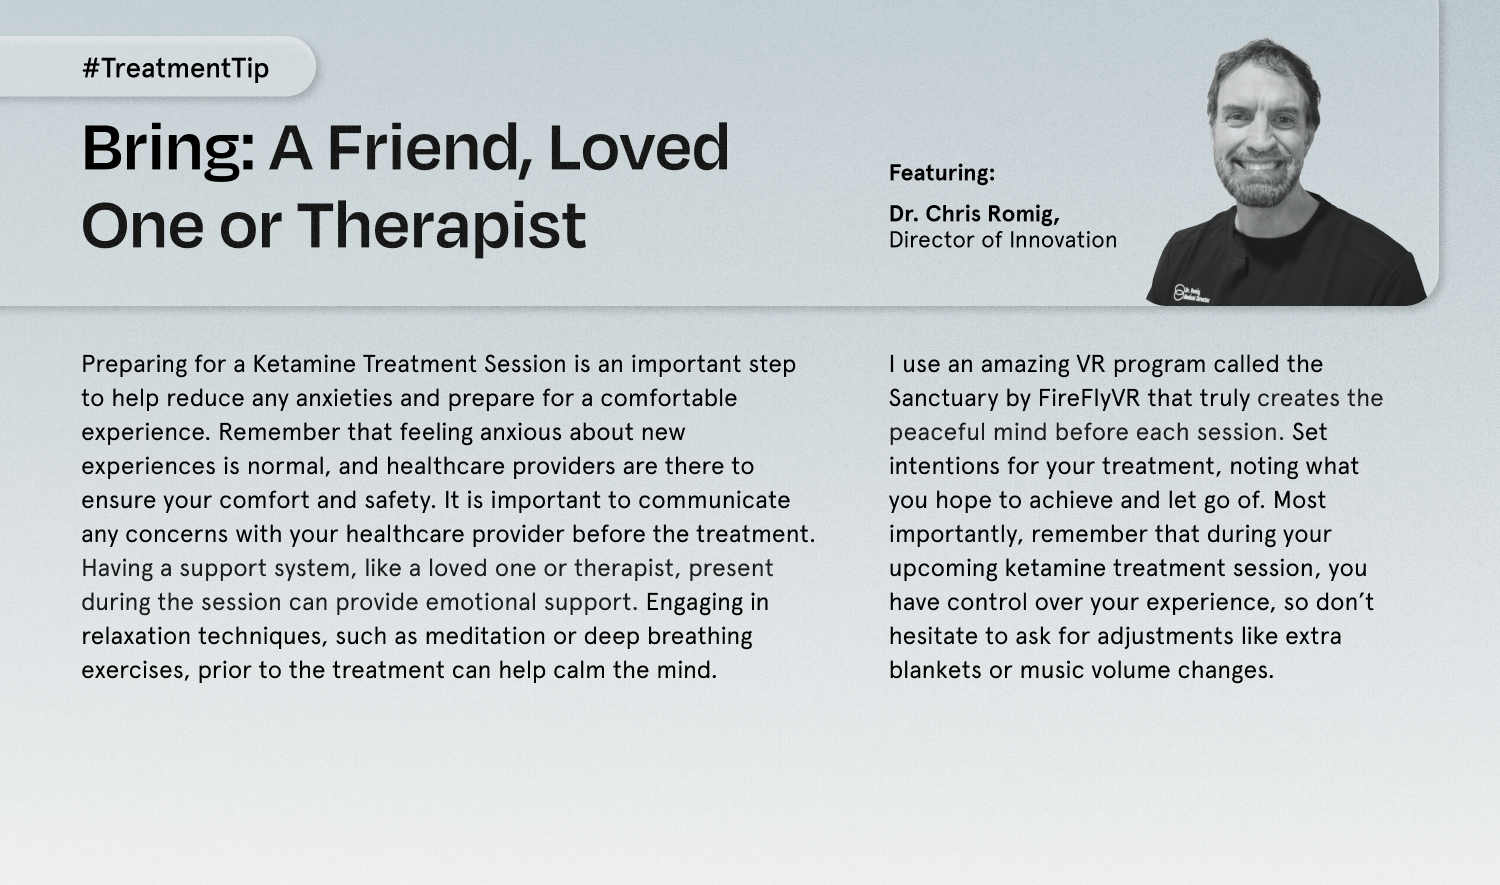 Treatment tip: bring a friend, loved one, or therapist